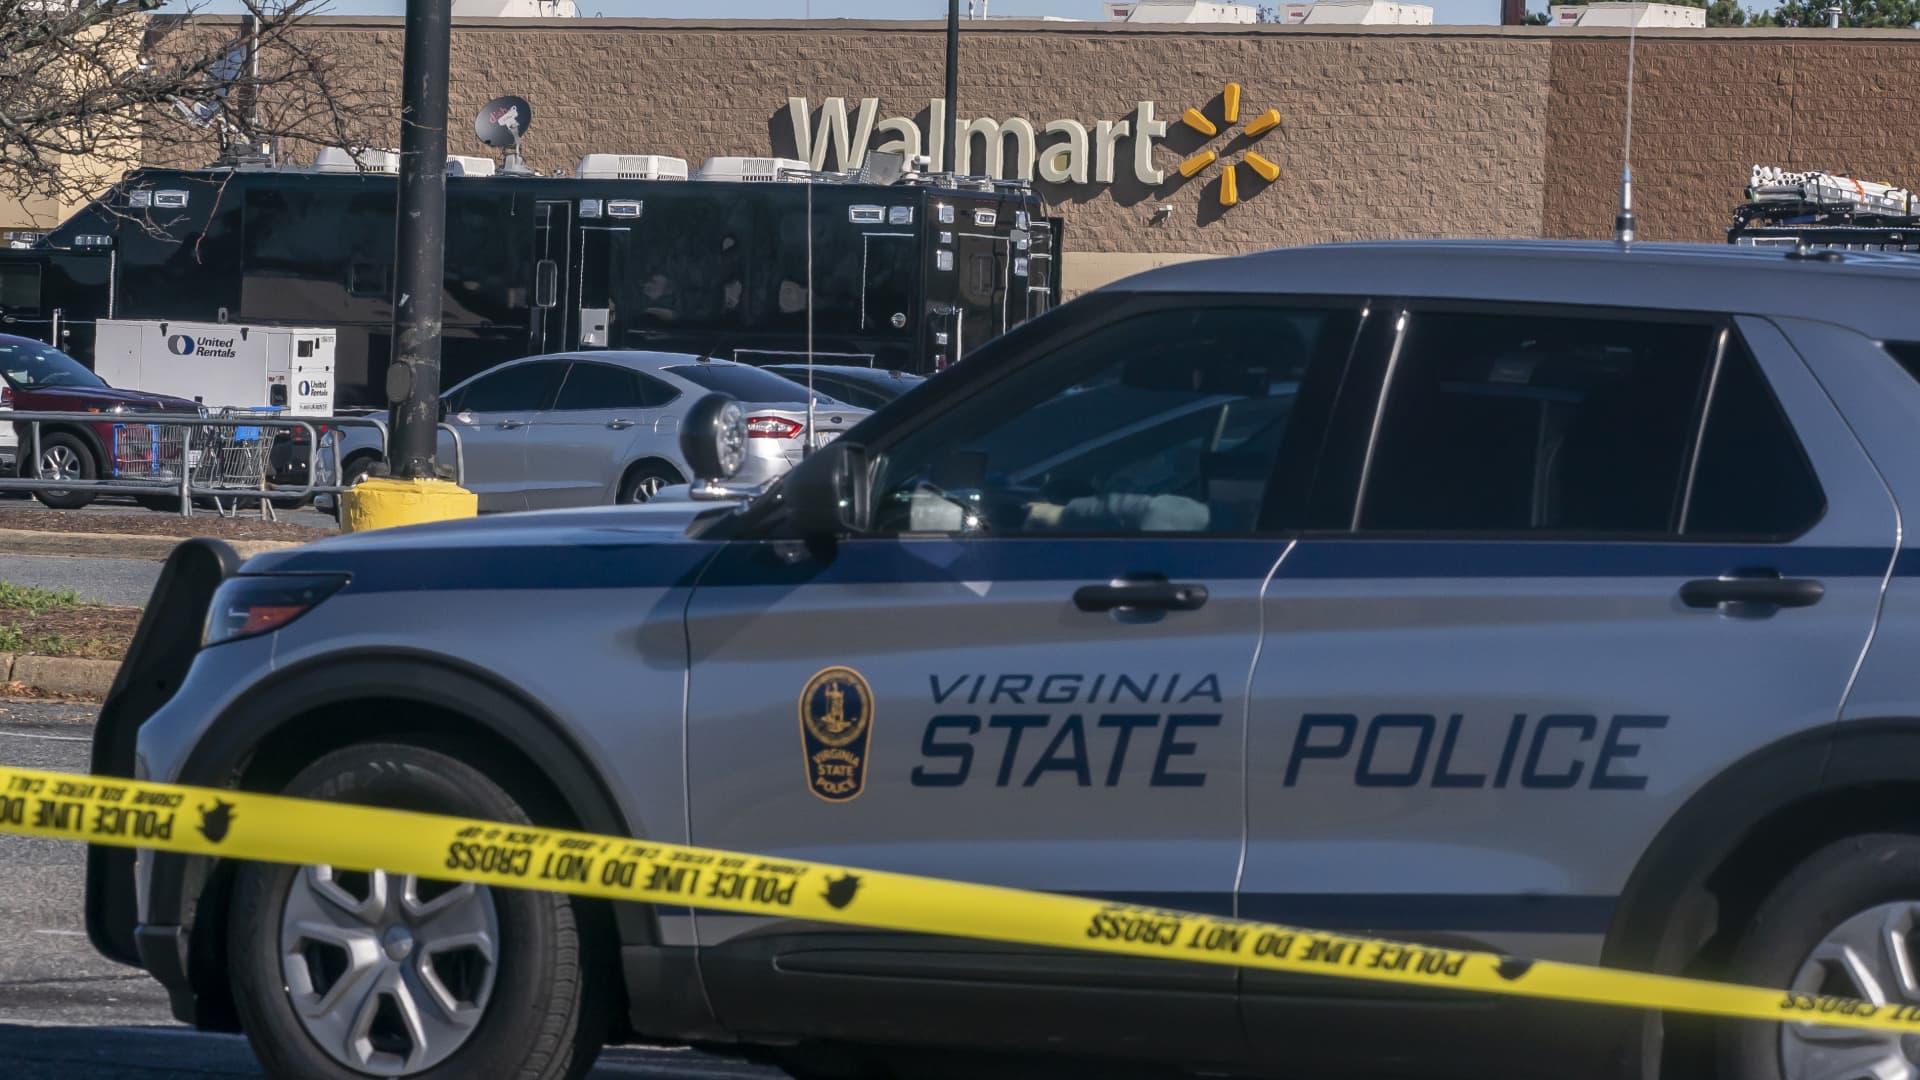 Walmart shooter bought pistol on the day of the attack and left behind a ‘death note’